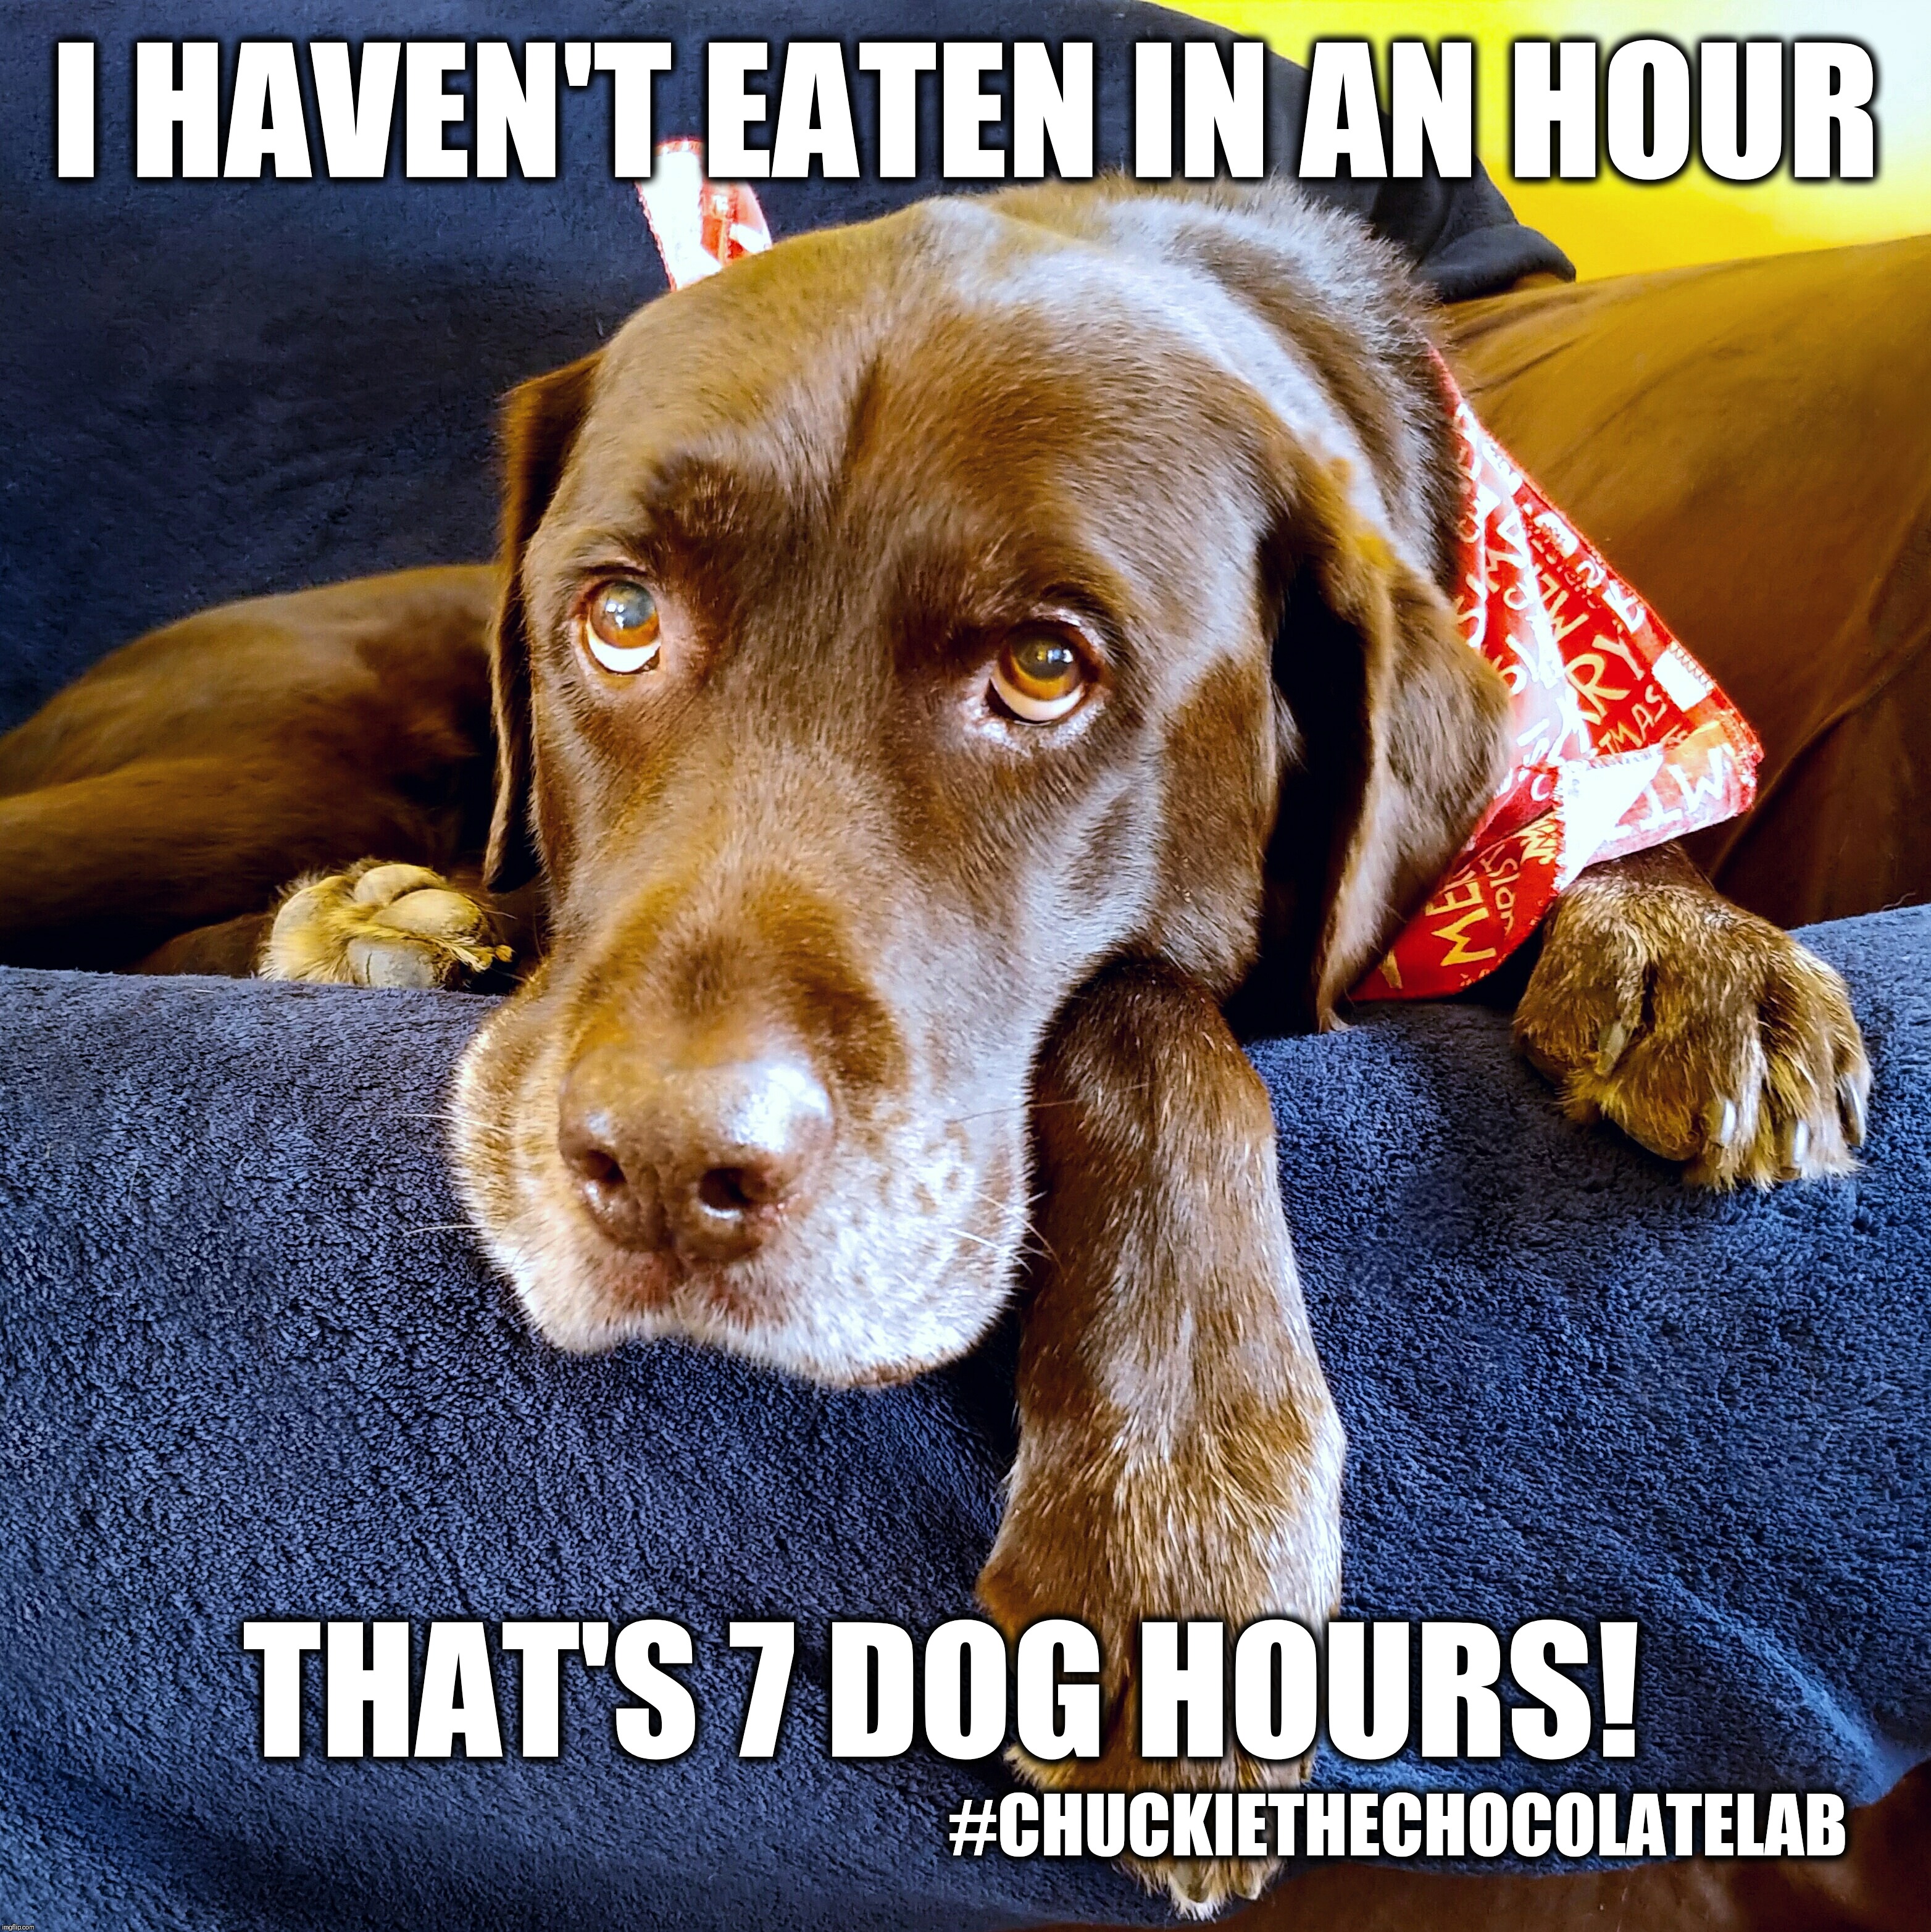 I haven't eaten in an hour | I HAVEN'T EATEN IN AN HOUR; THAT'S 7 DOG HOURS! #CHUCKIETHECHOCOLATELAB | image tagged in chuckie the chocolate lab,hungry,funny,dogs,memes,dog hours | made w/ Imgflip meme maker